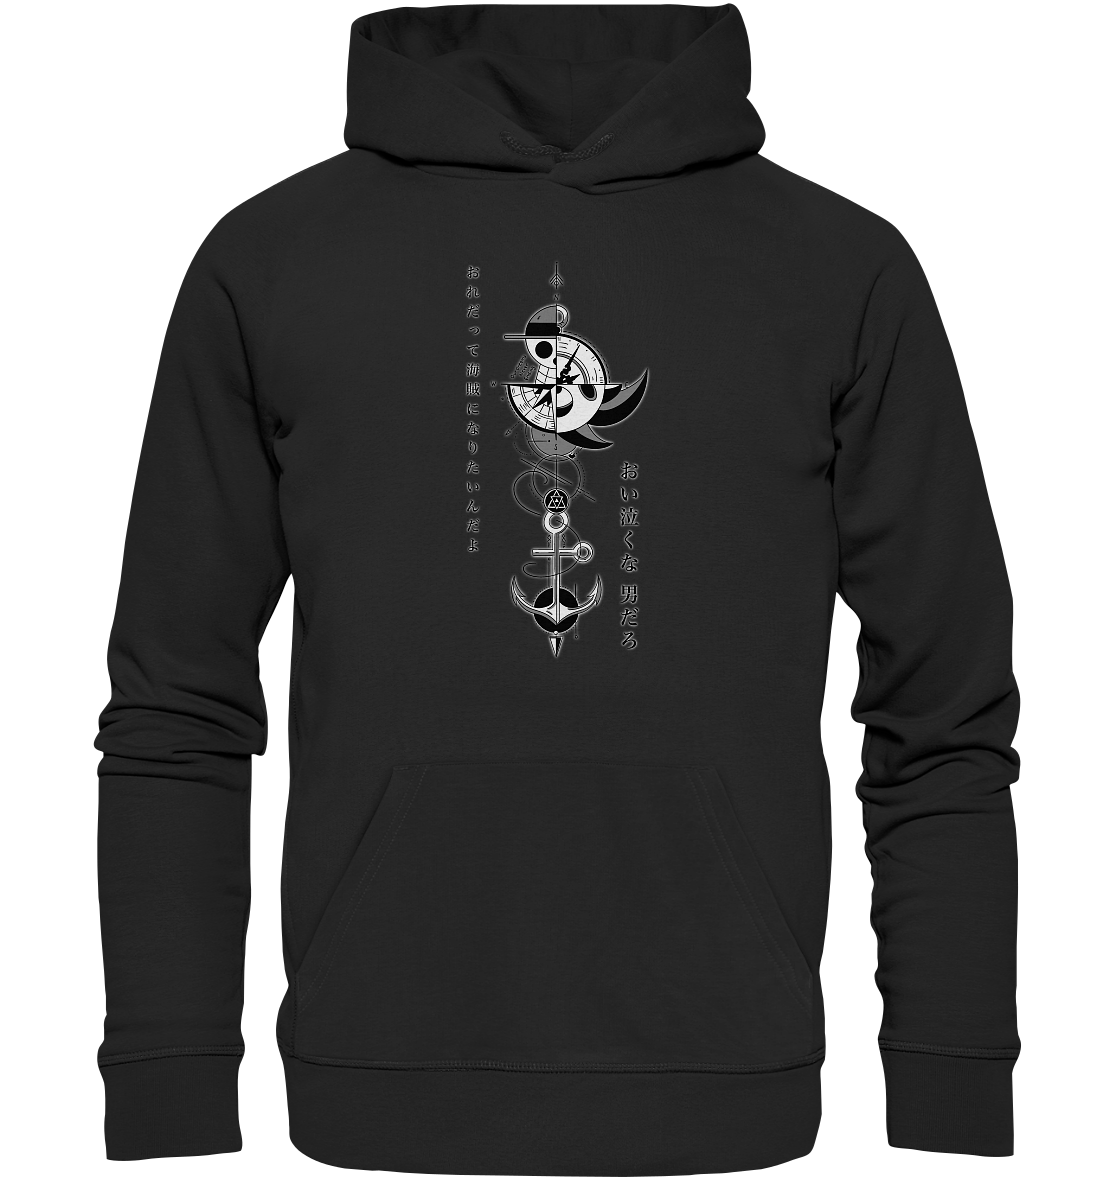 One Piece Our Dreams - Basic Hoodie SALE